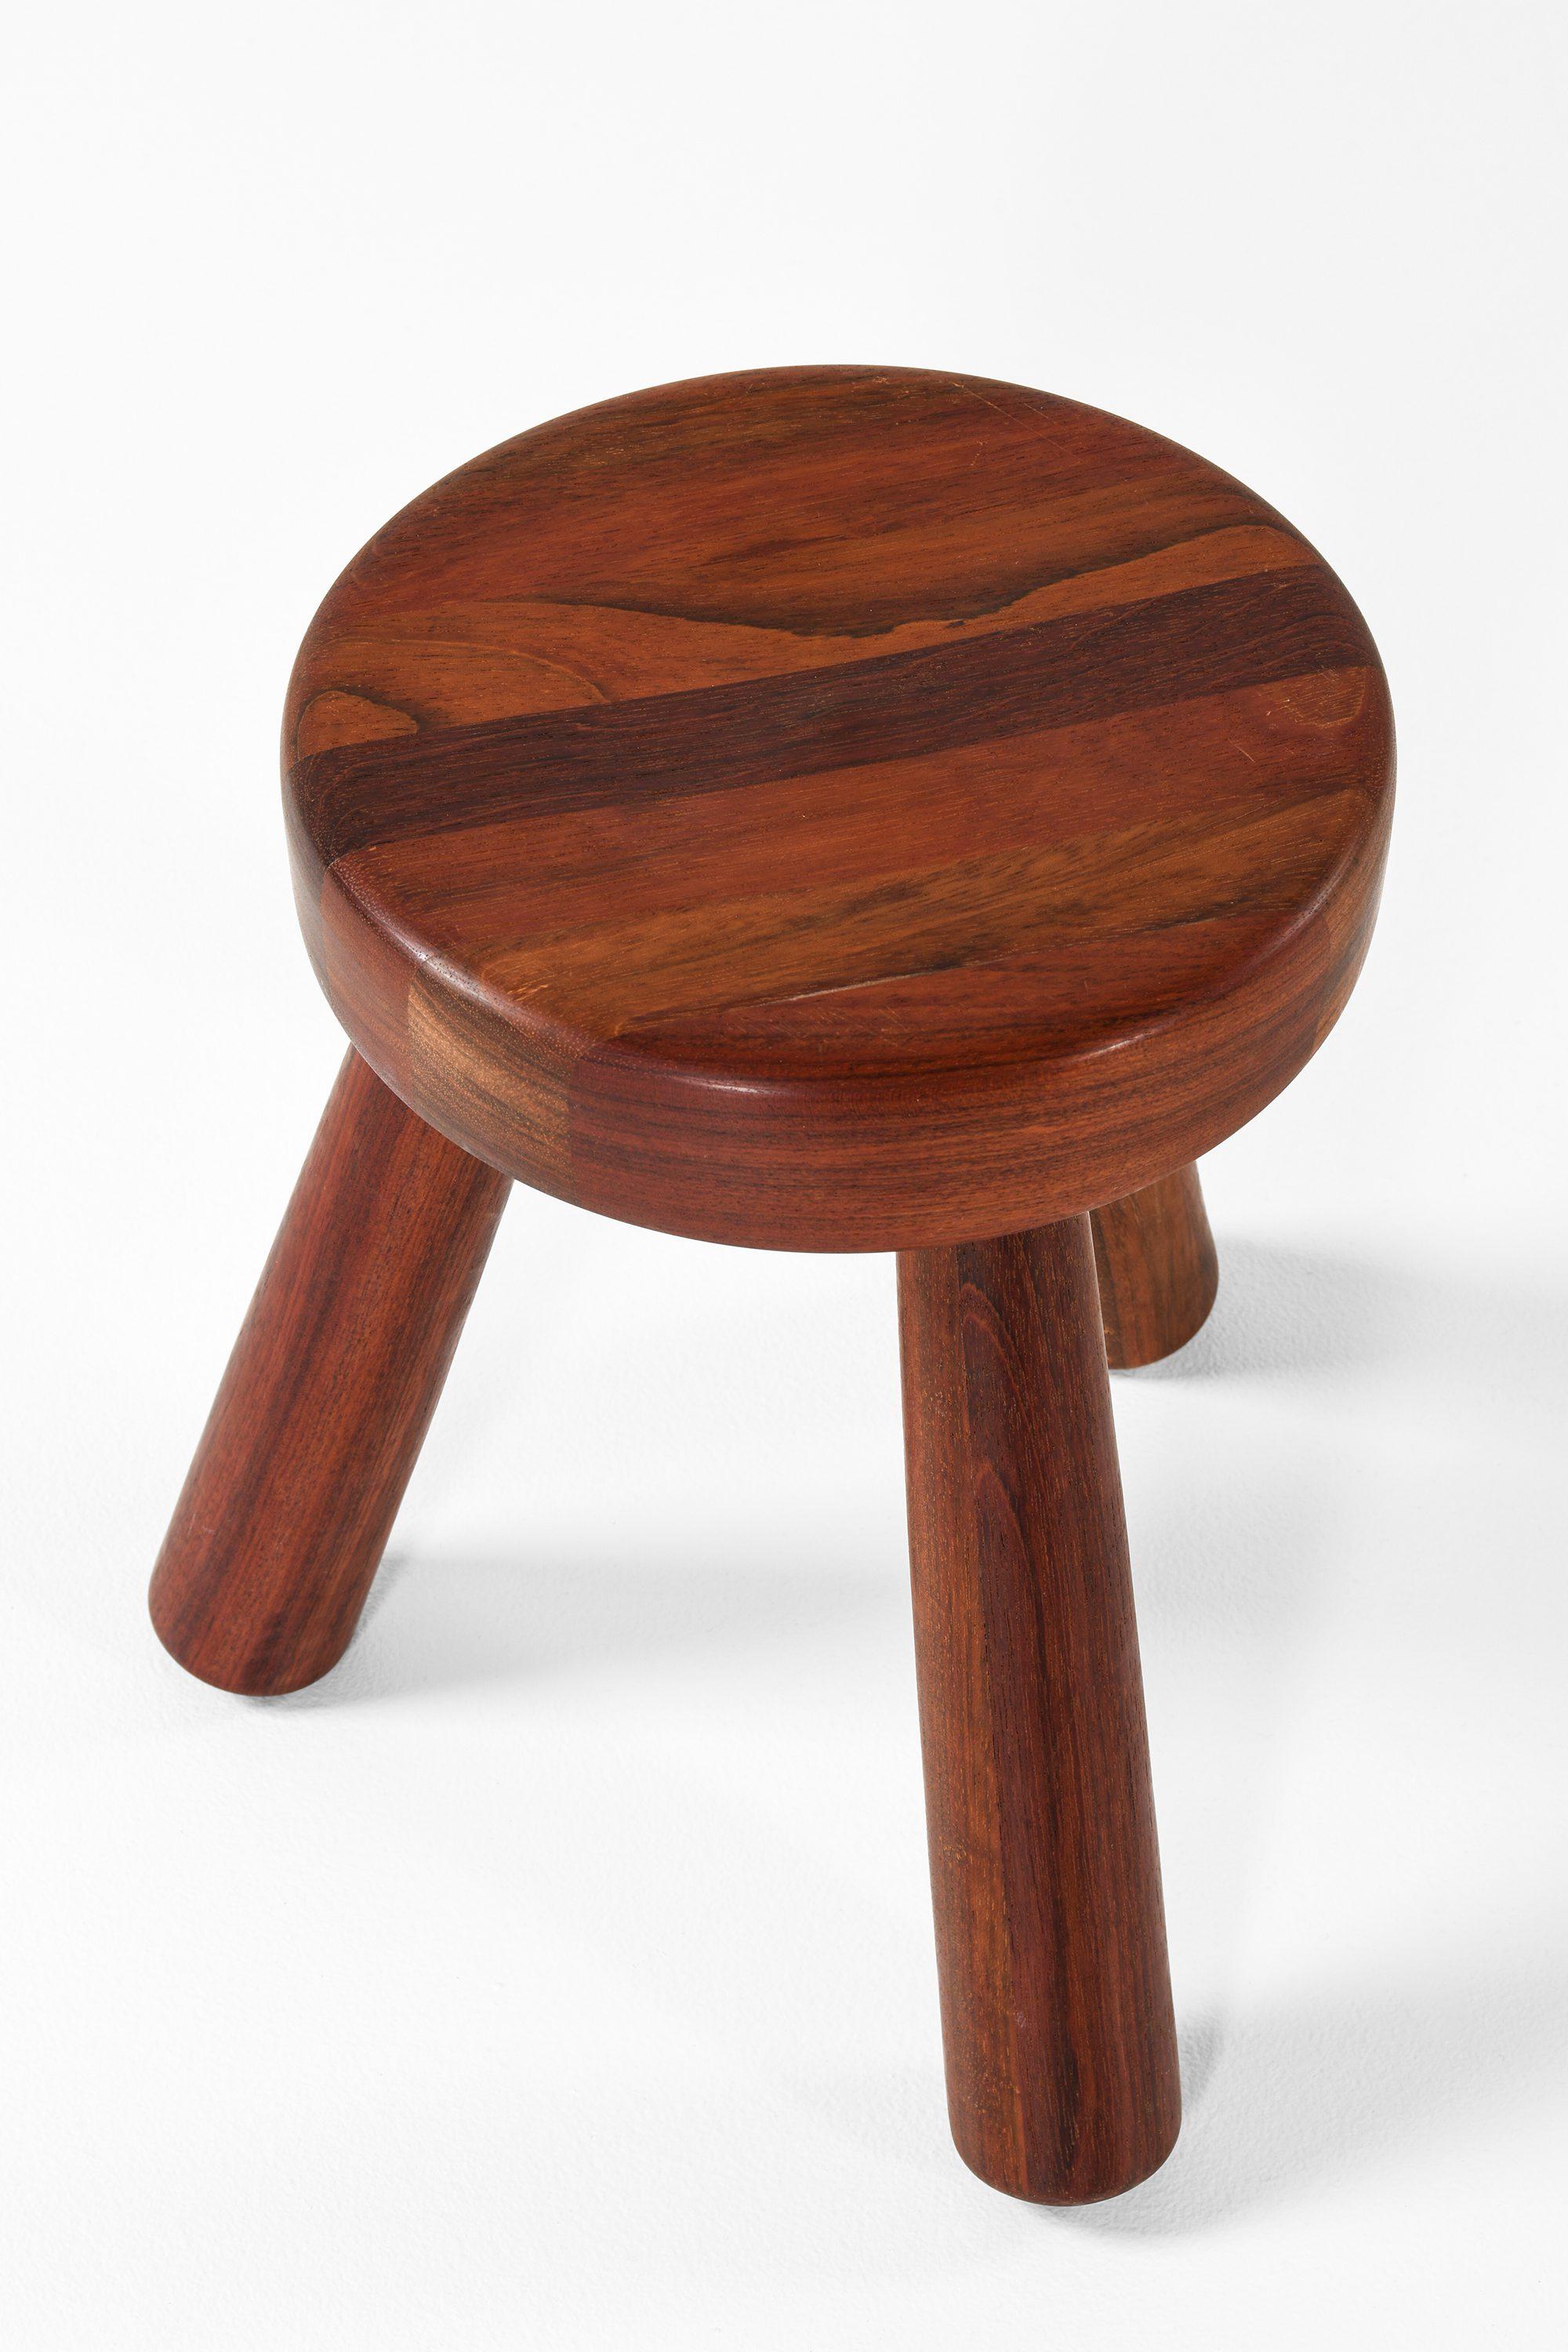 Small Stool in Jatoba Wood by Ingvar Hildingsson, 1980's

Additional Information:
Material: Jatoba wood
Style: Mid century, Scandinavia
Produced by Ingvar Hildingsson in Sweden
Dimensions (W x D x H): 26 x 26 x 36 cm
Condition: Good vintage